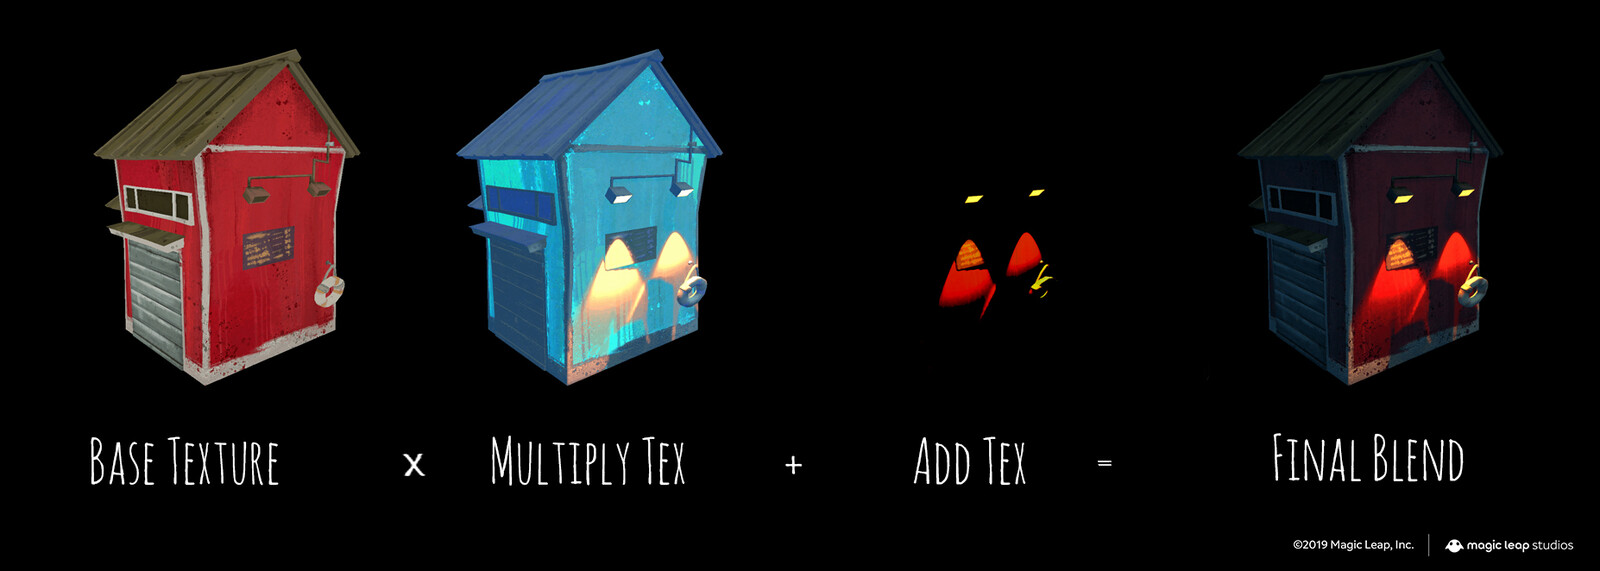 To achieve the same final blended look at a cheaper cost, I made a tool that generated delta textures. When these delta textures are combined with the base texture, it produces a final blend that is nearly identical to the original.